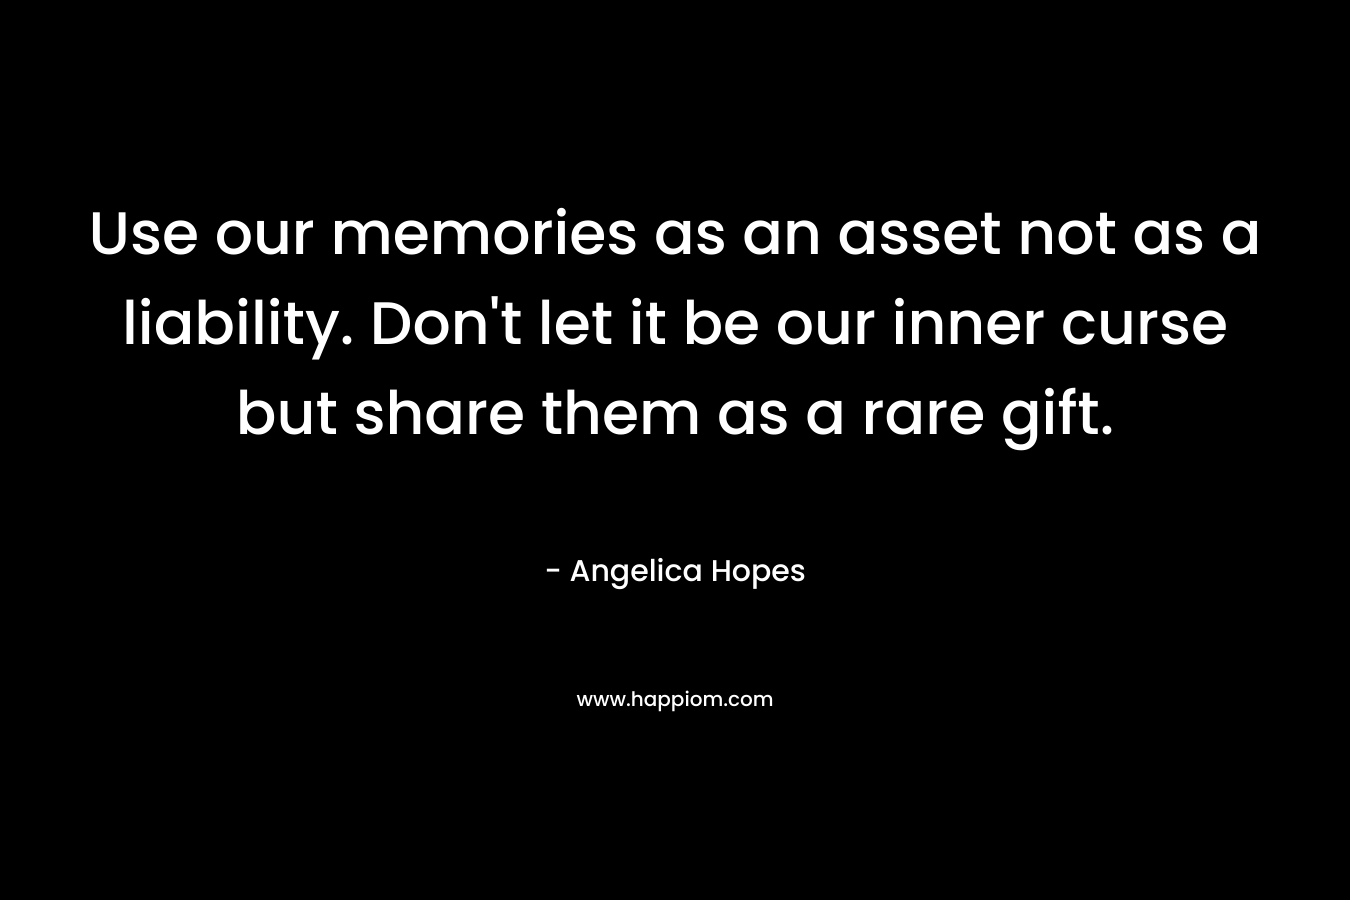 Use our memories as an asset not as a liability. Don't let it be our inner curse but share them as a rare gift.